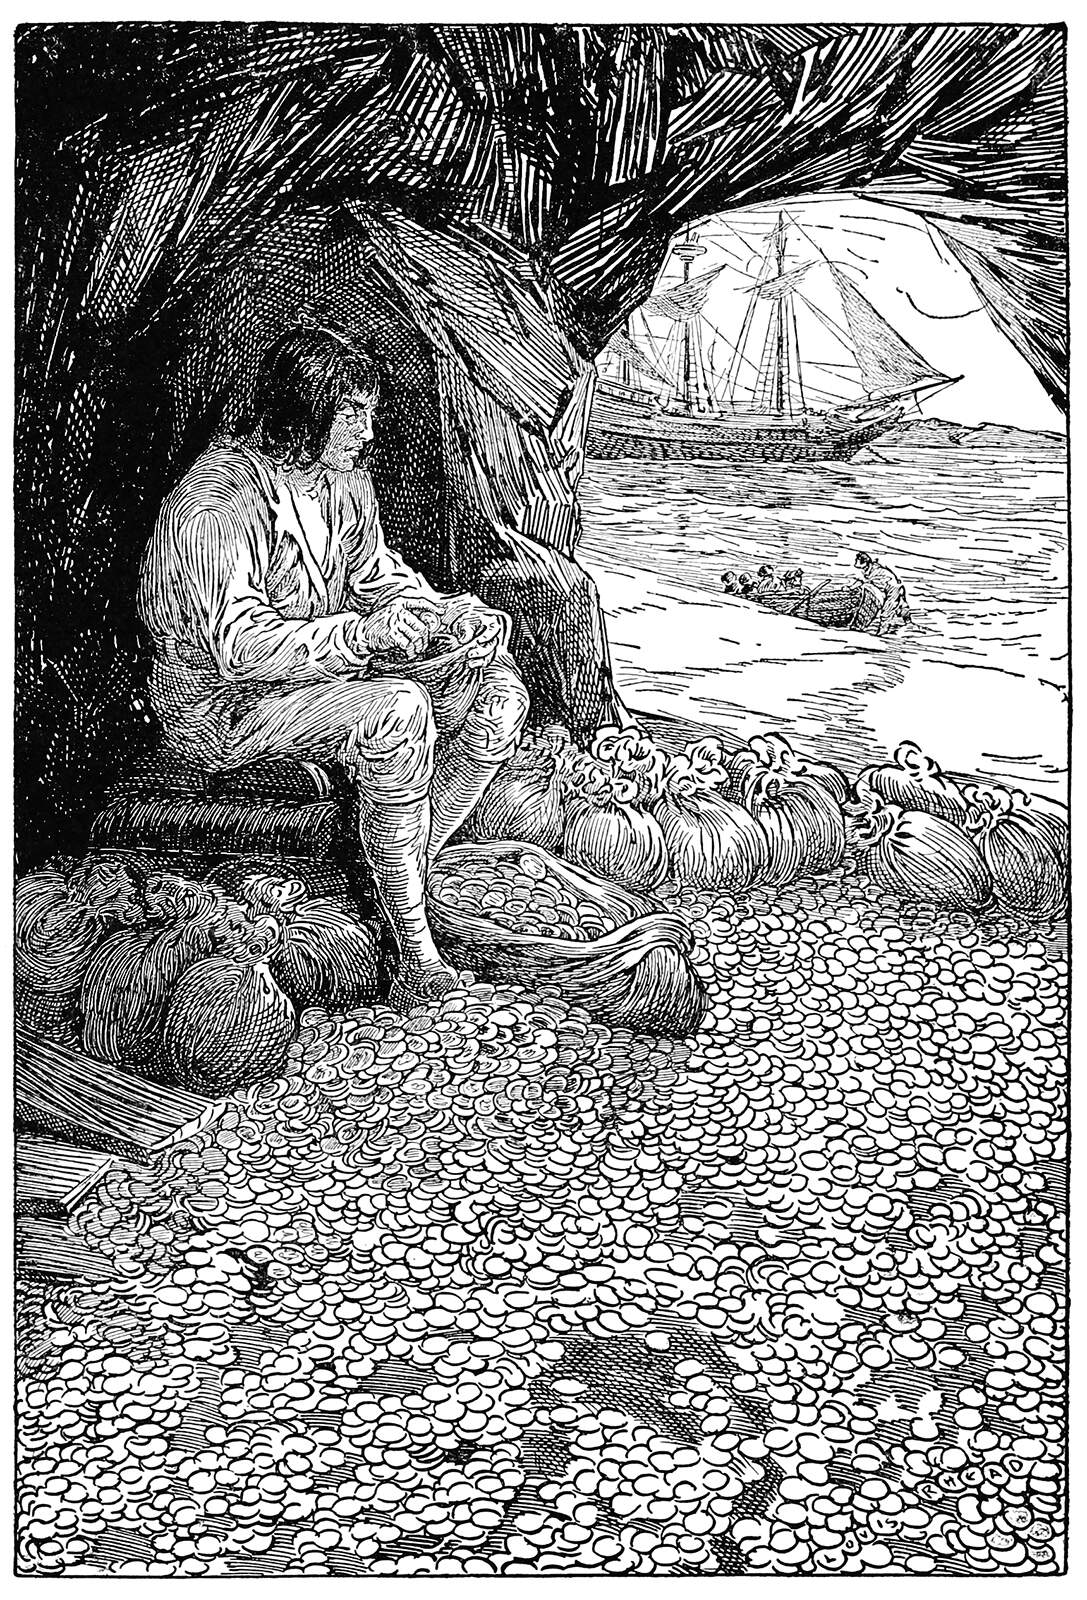 A man sits in a cave surrounded by coins